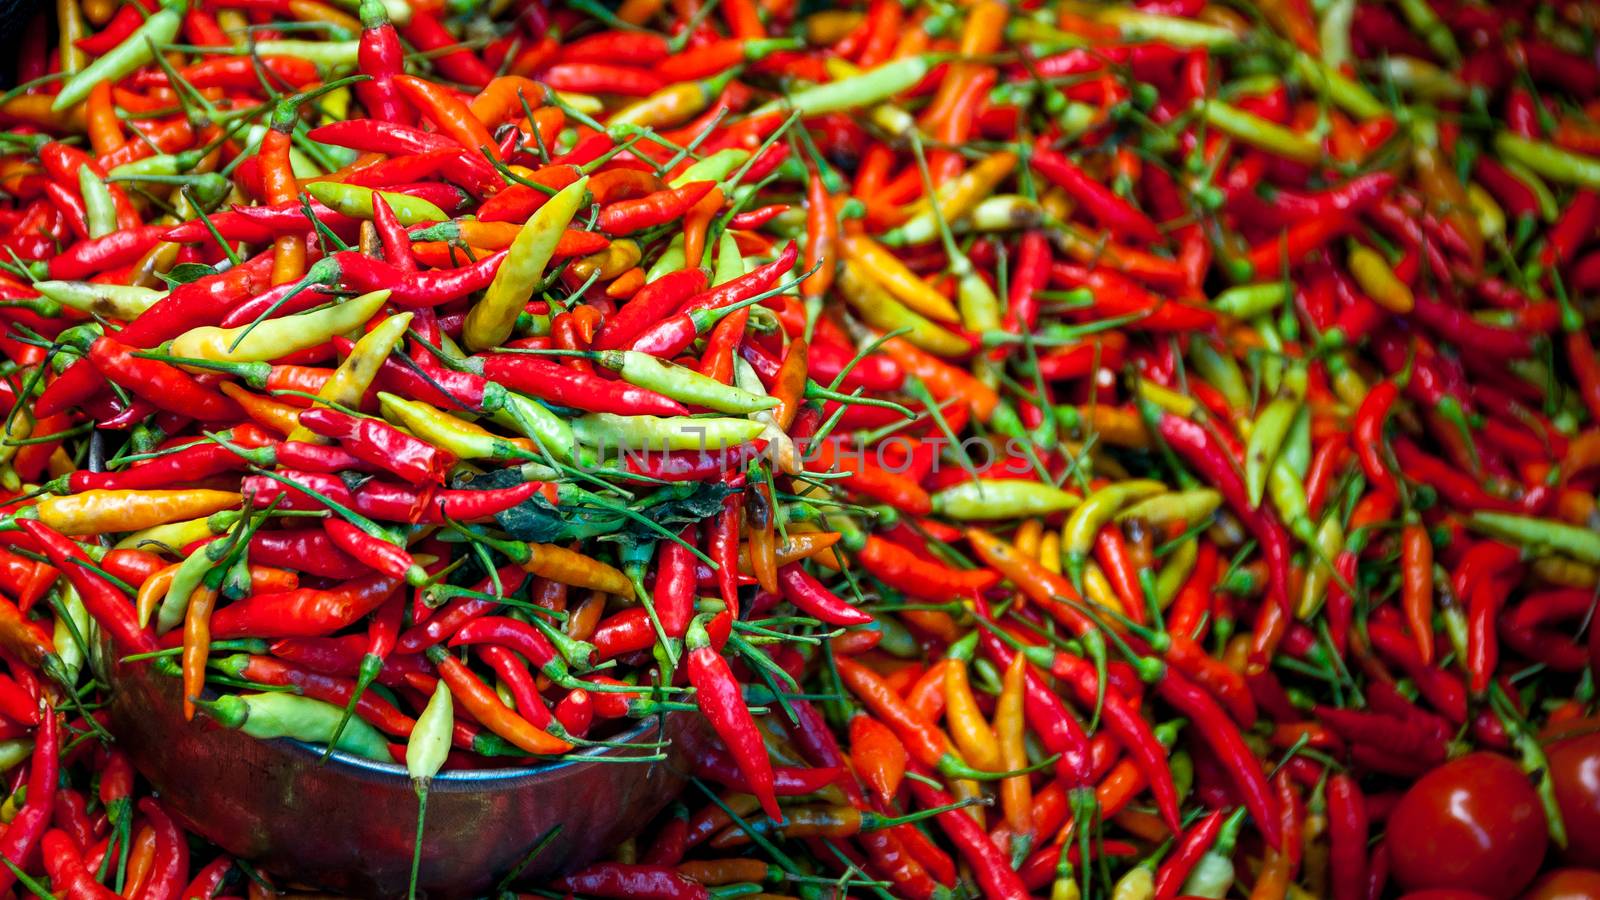 Loads of red, green and orange Chillies